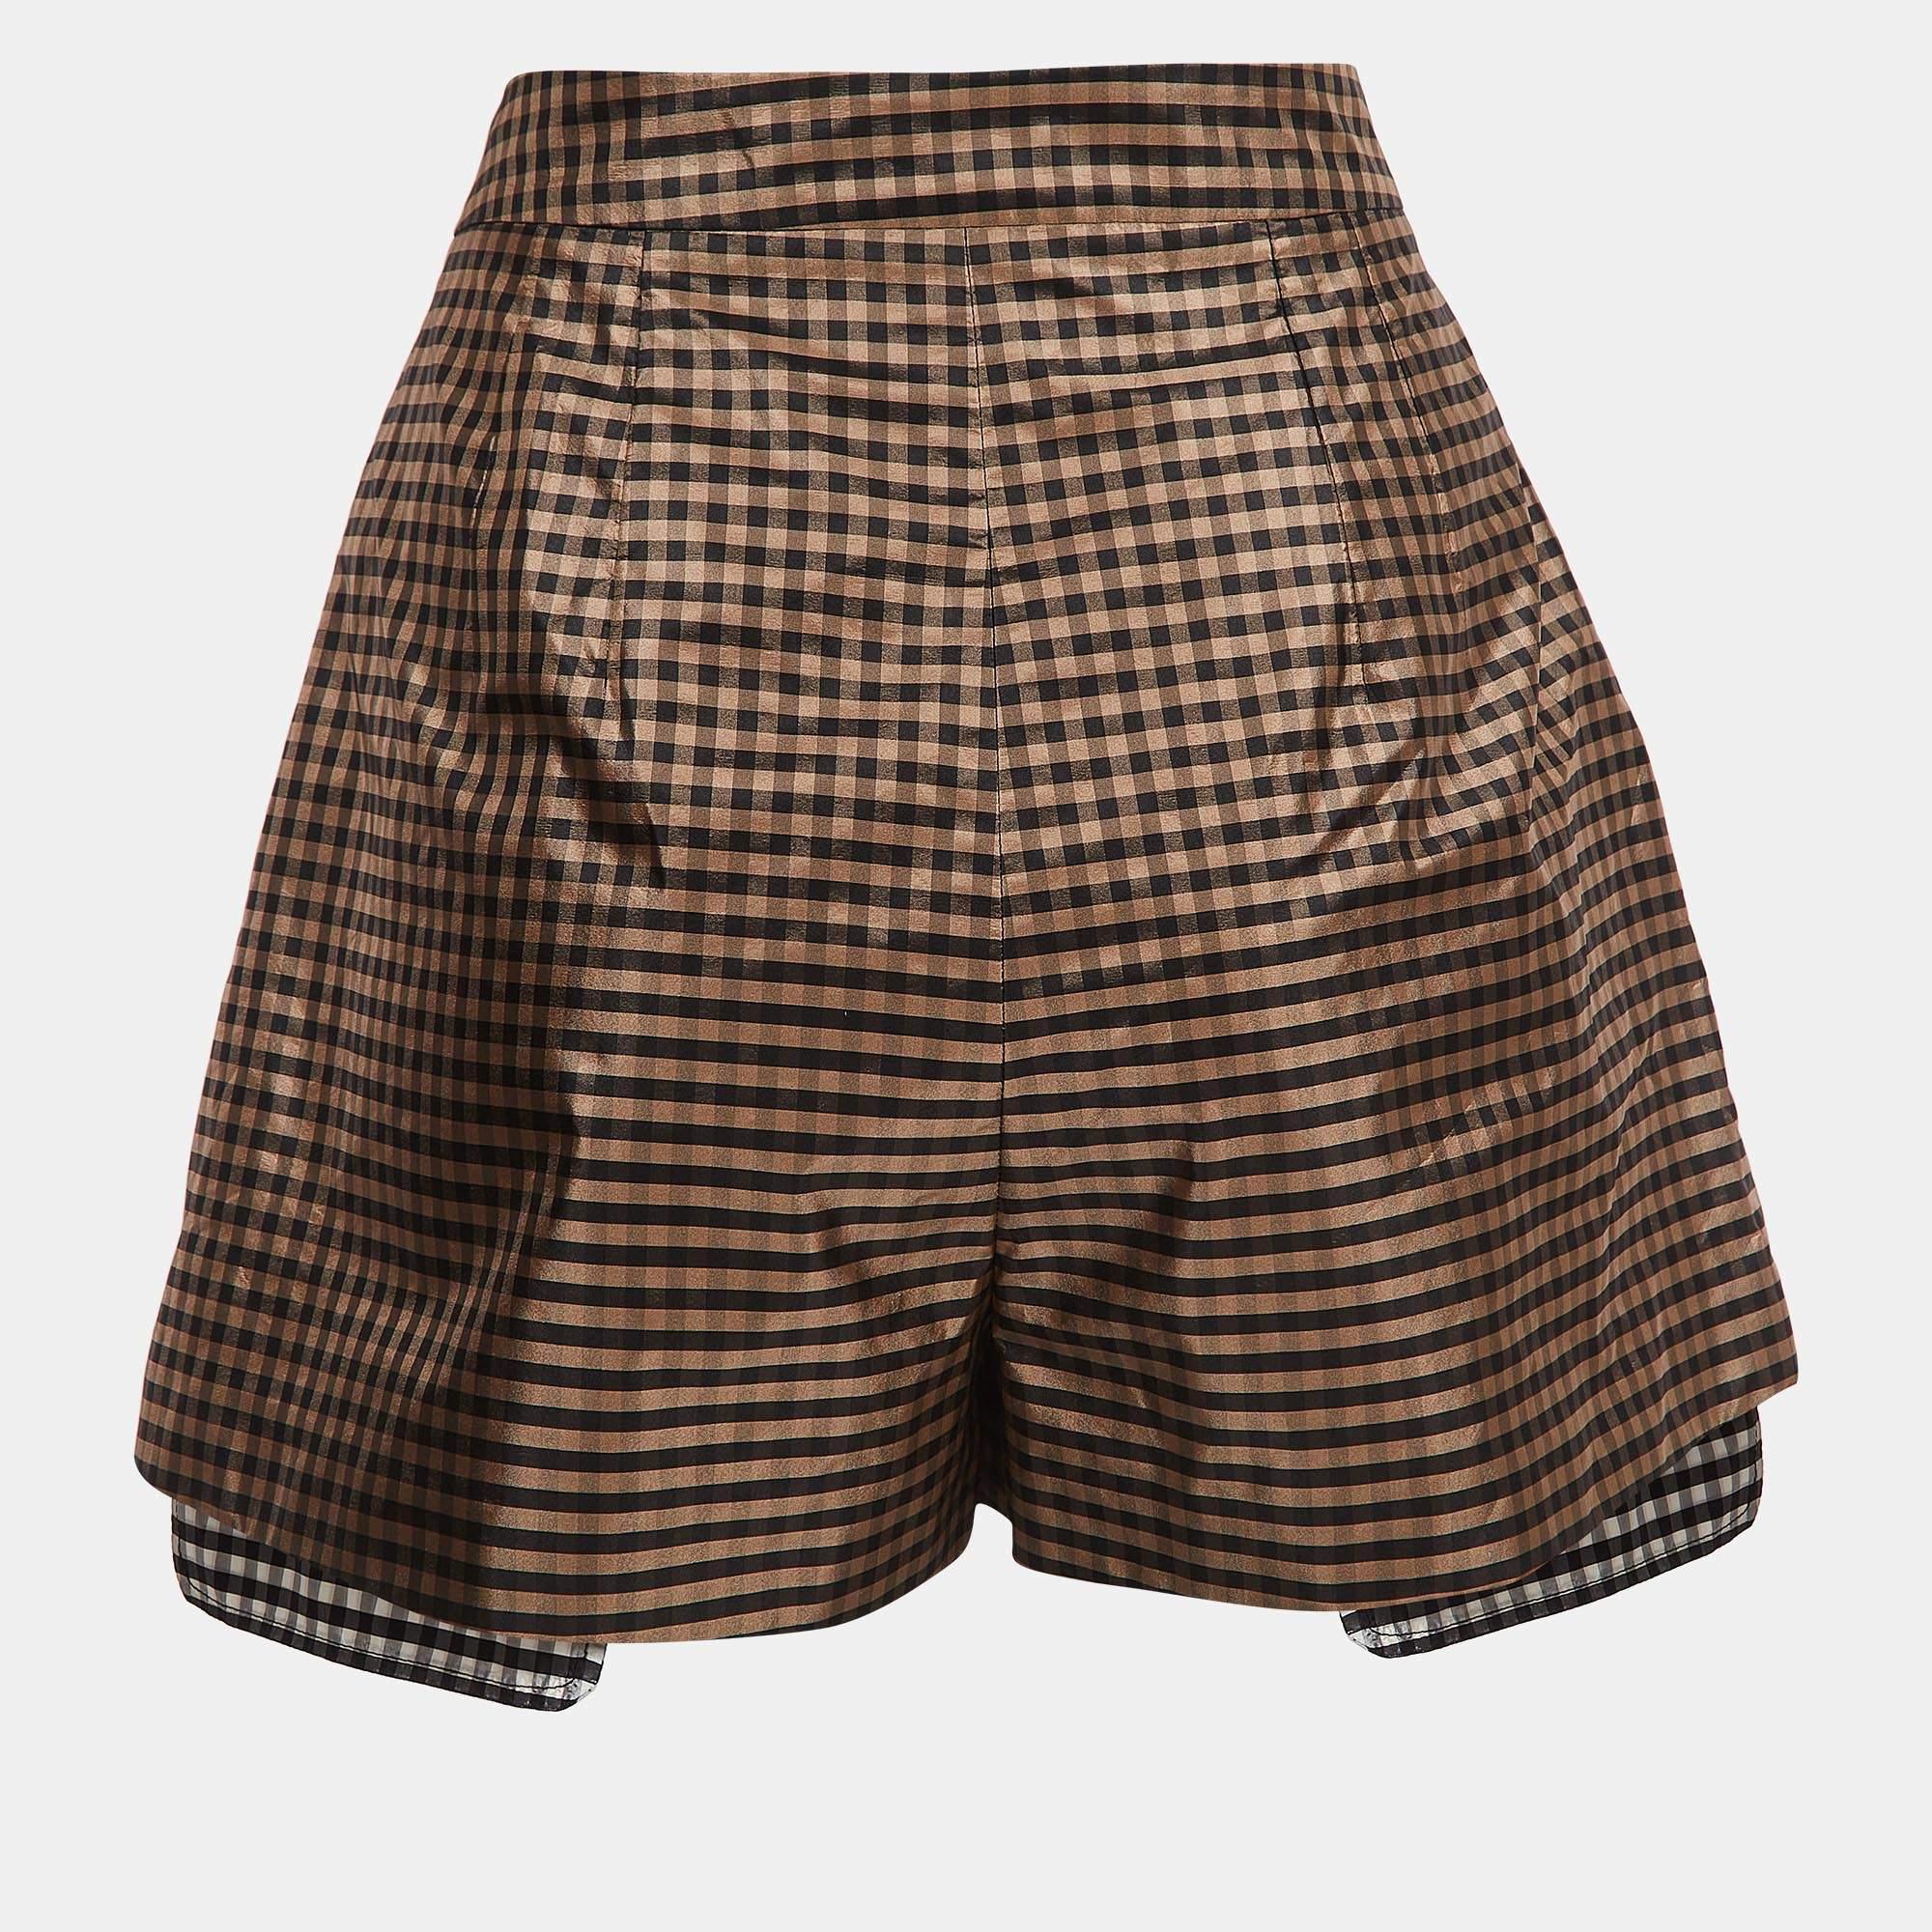 Beachy vacations call for a cute pair of shorts like this. Stitched using high-quality fabric, this pair of shorts is styled with classic details and has a superb length. Wear it with crop tops or T-shirts.

